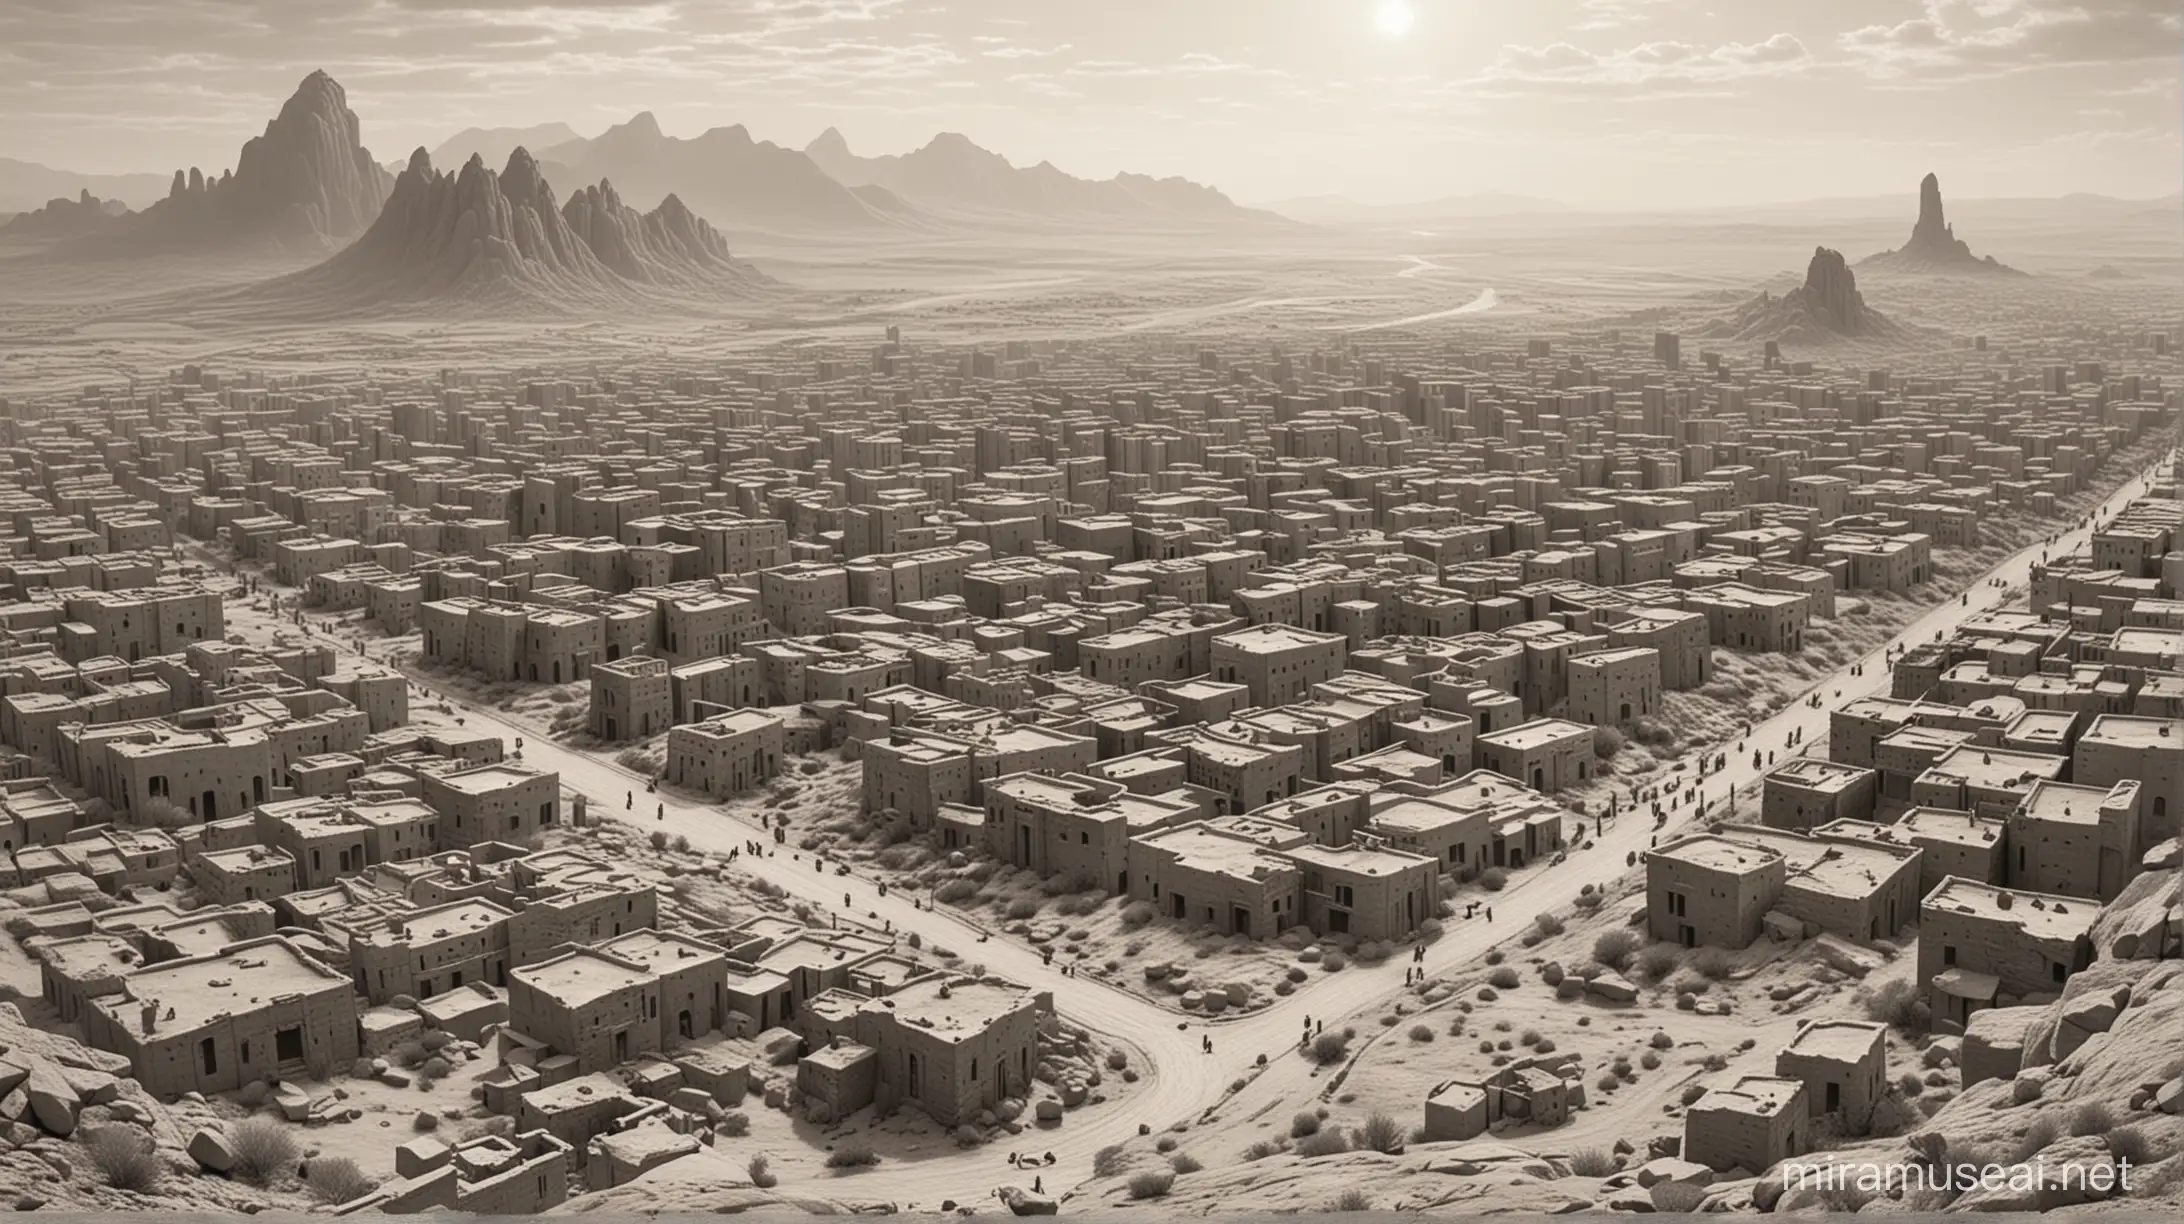 Create a pencil drawing of a big city in a gray, rocky and mystique desert. The city has an ancient look, probably Babylonian. The city consists of 7 different areas that are located coaxial around the city center. Towards the center, the city gets higher and higher.   